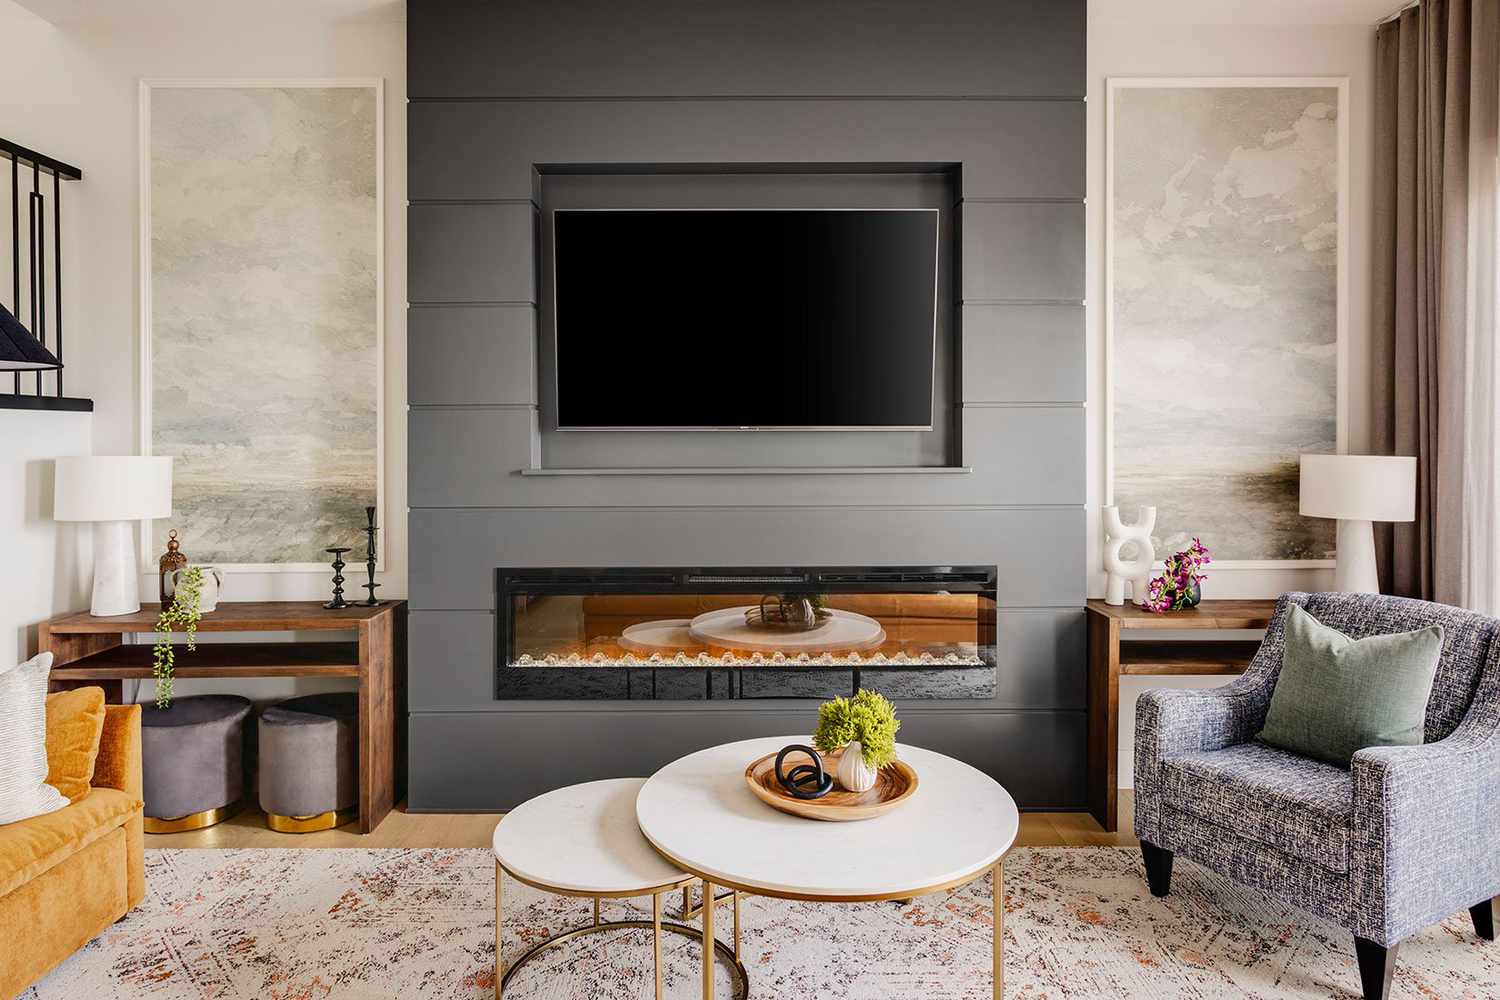 electric fireplace ideas with tv niche above